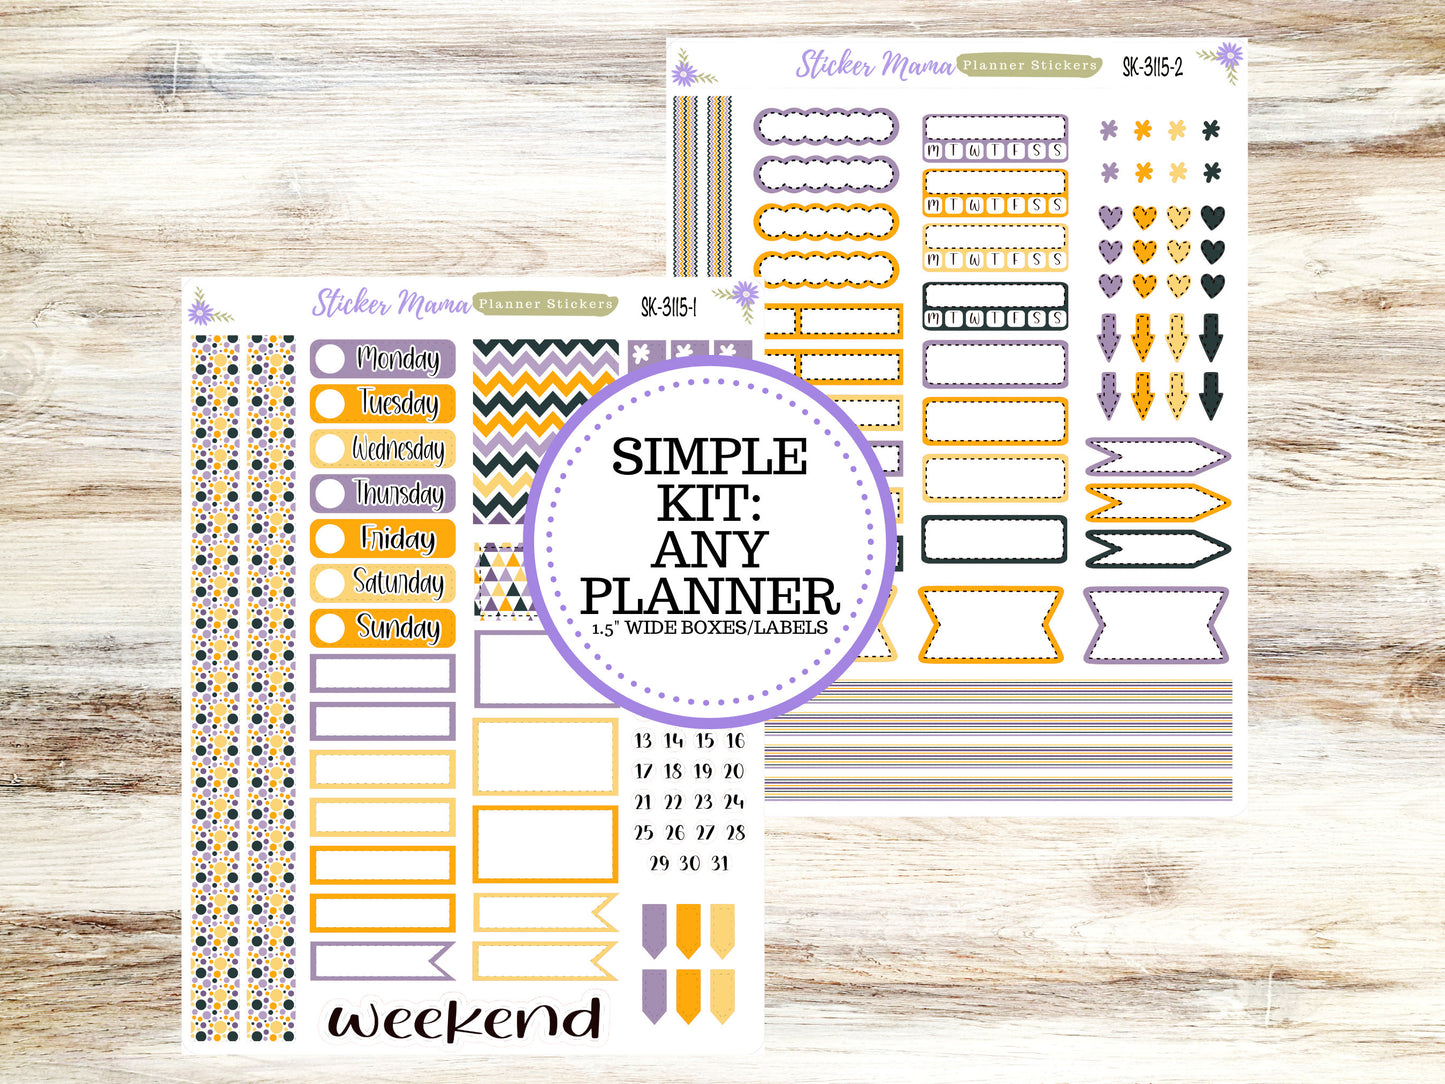 SIMPLE KIT  || #3115 || Spooky Palette || Any Kind Planner || Planner Stickers || Planner Stickers